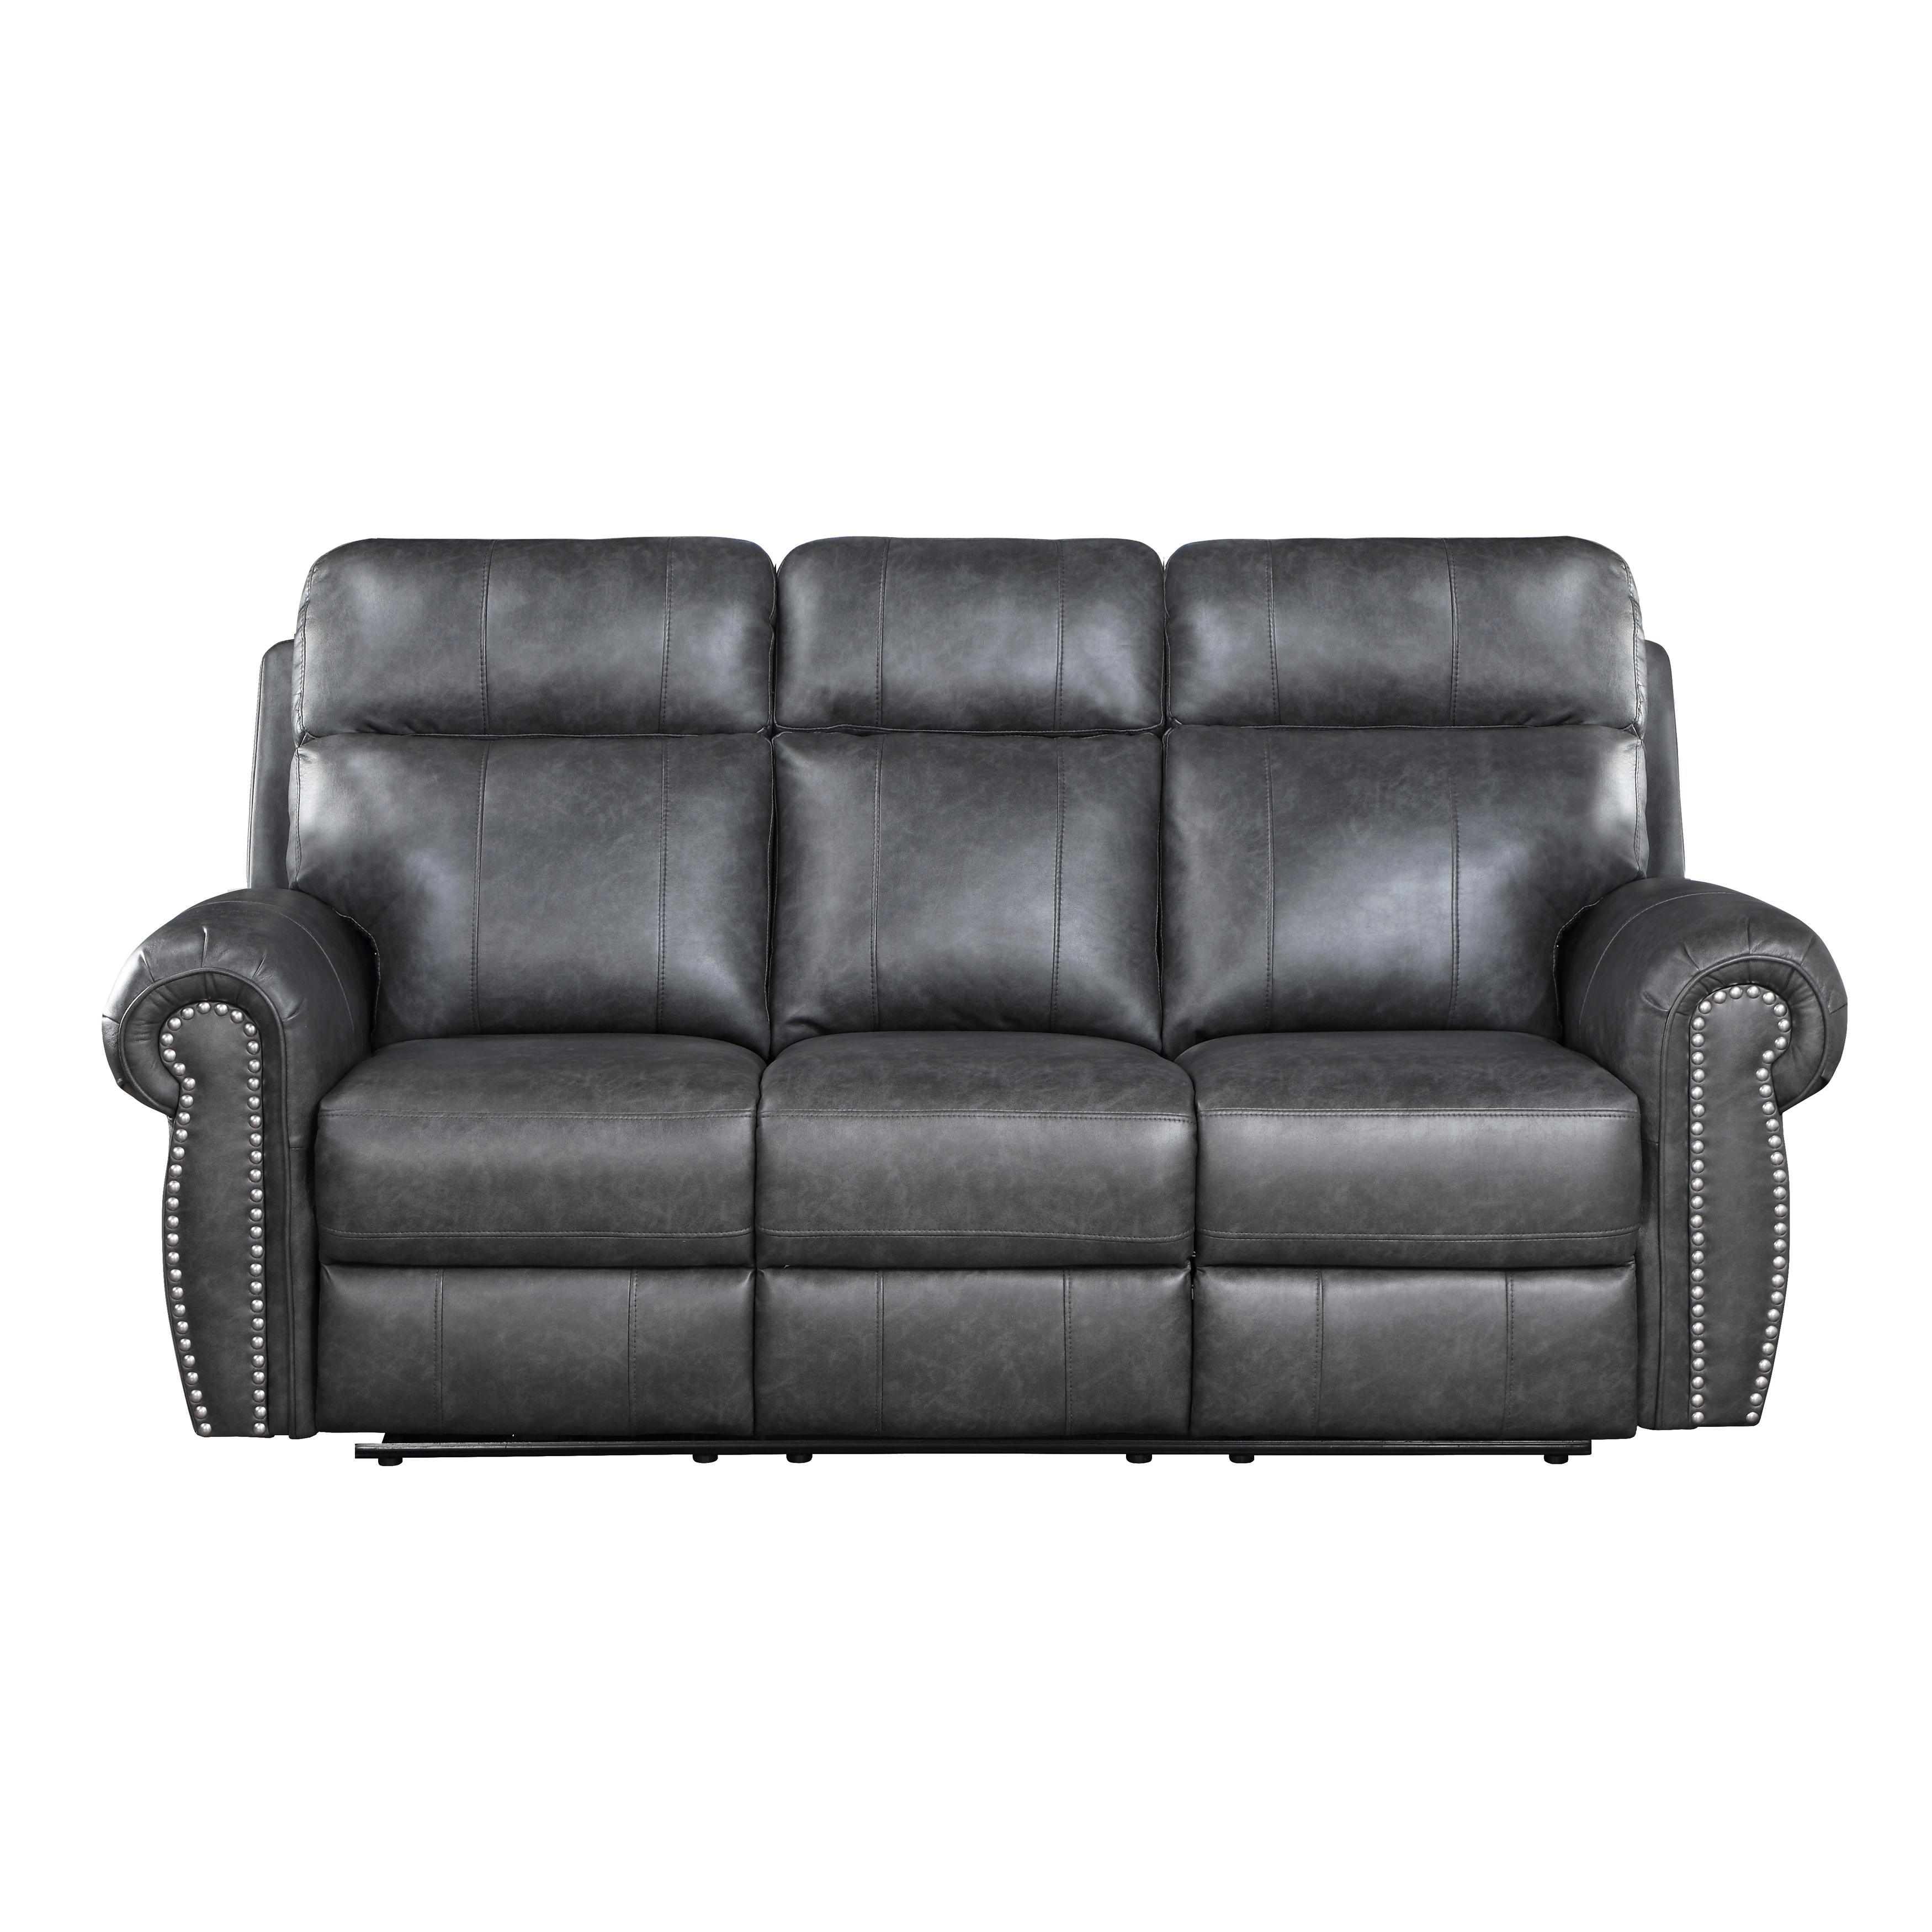 Homelegance 9488GY-3PW Granville Power Reclining Sofa